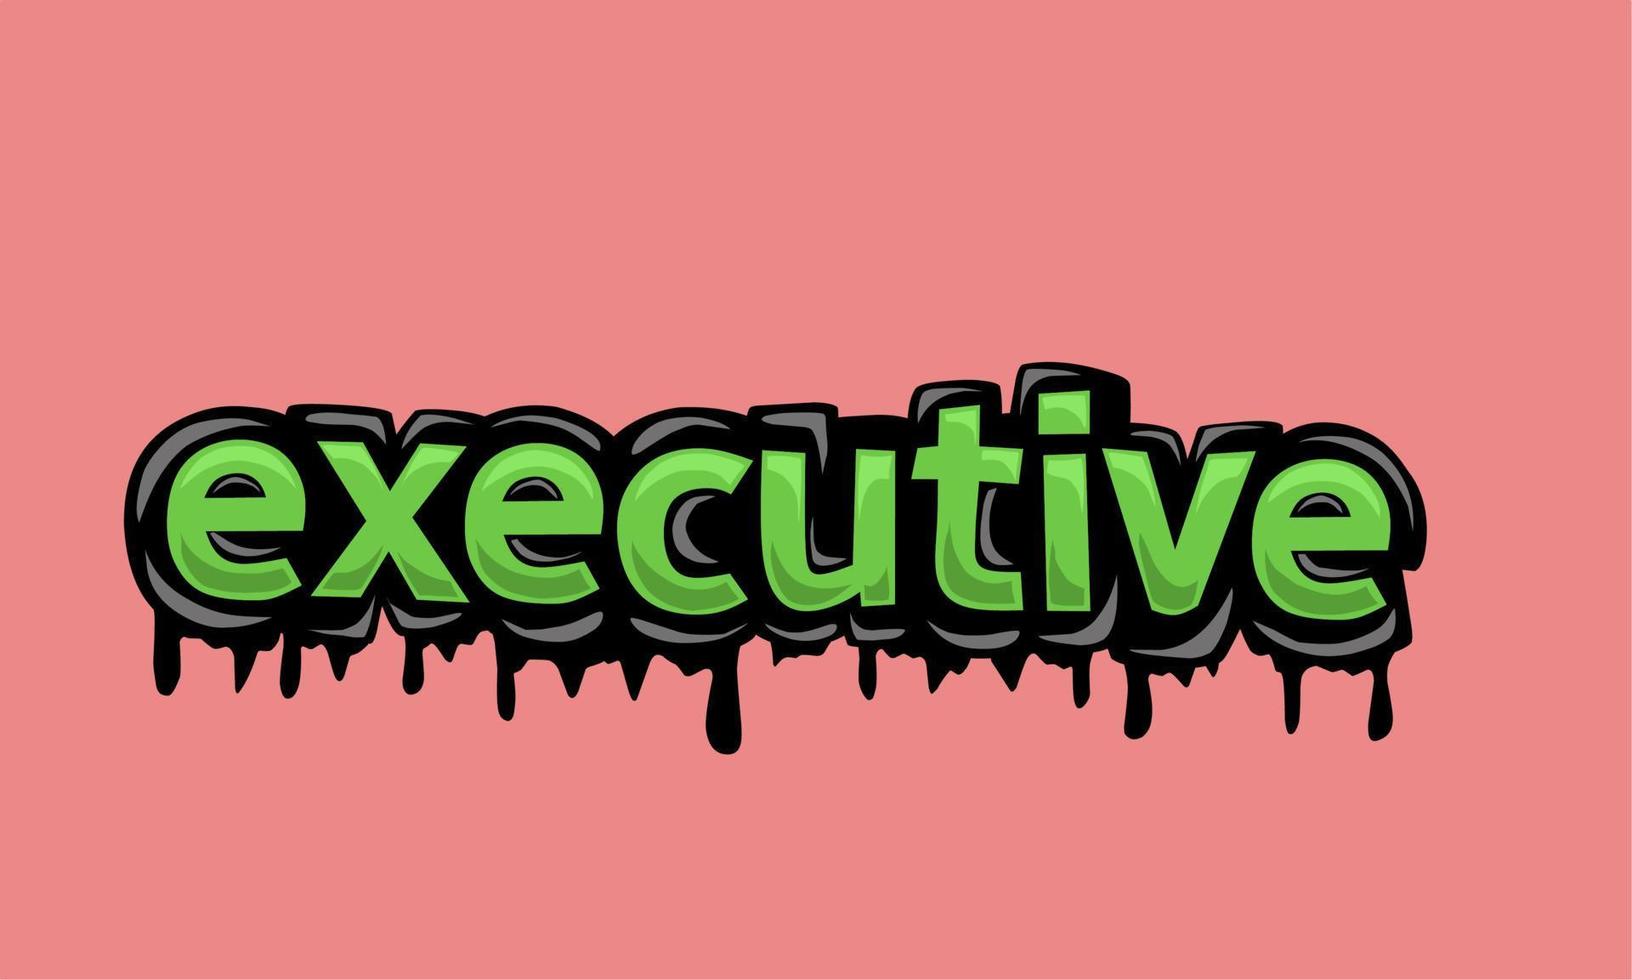 EXECUTIVE writing vector design on pink  background